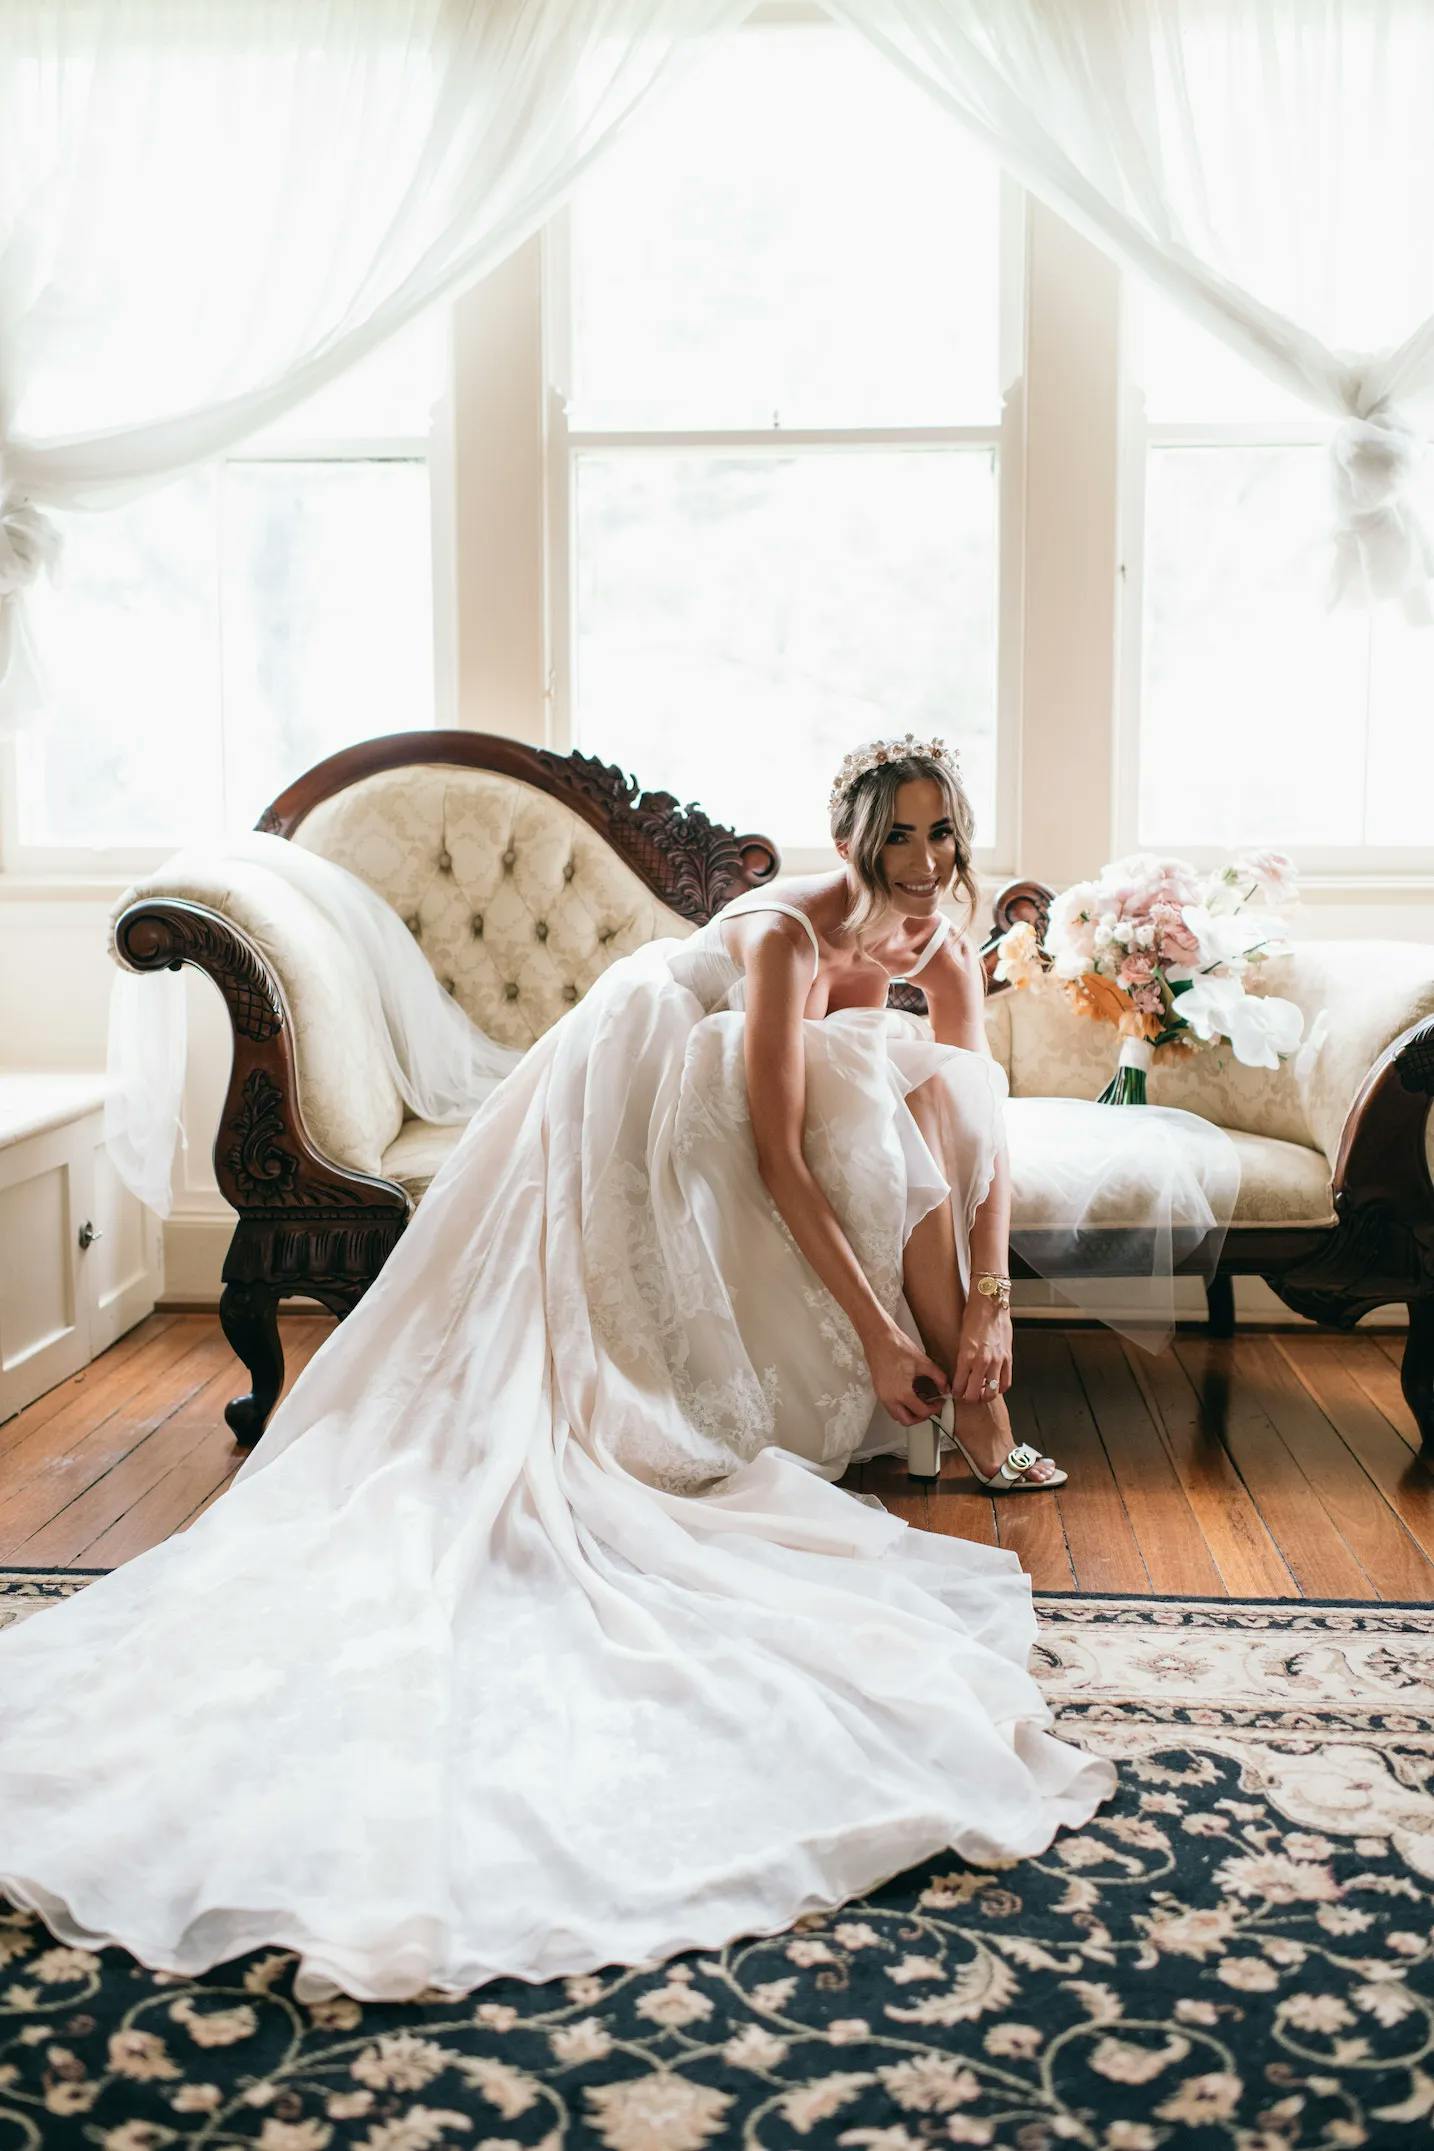 A bride in a white wedding gown sits on an antique sofa near a window with sheer curtains. She adjusts her white high-heel sandal while smiling. A bouquet of flowers is placed on the sofa beside her, and an ornate rug covers the wooden floor.